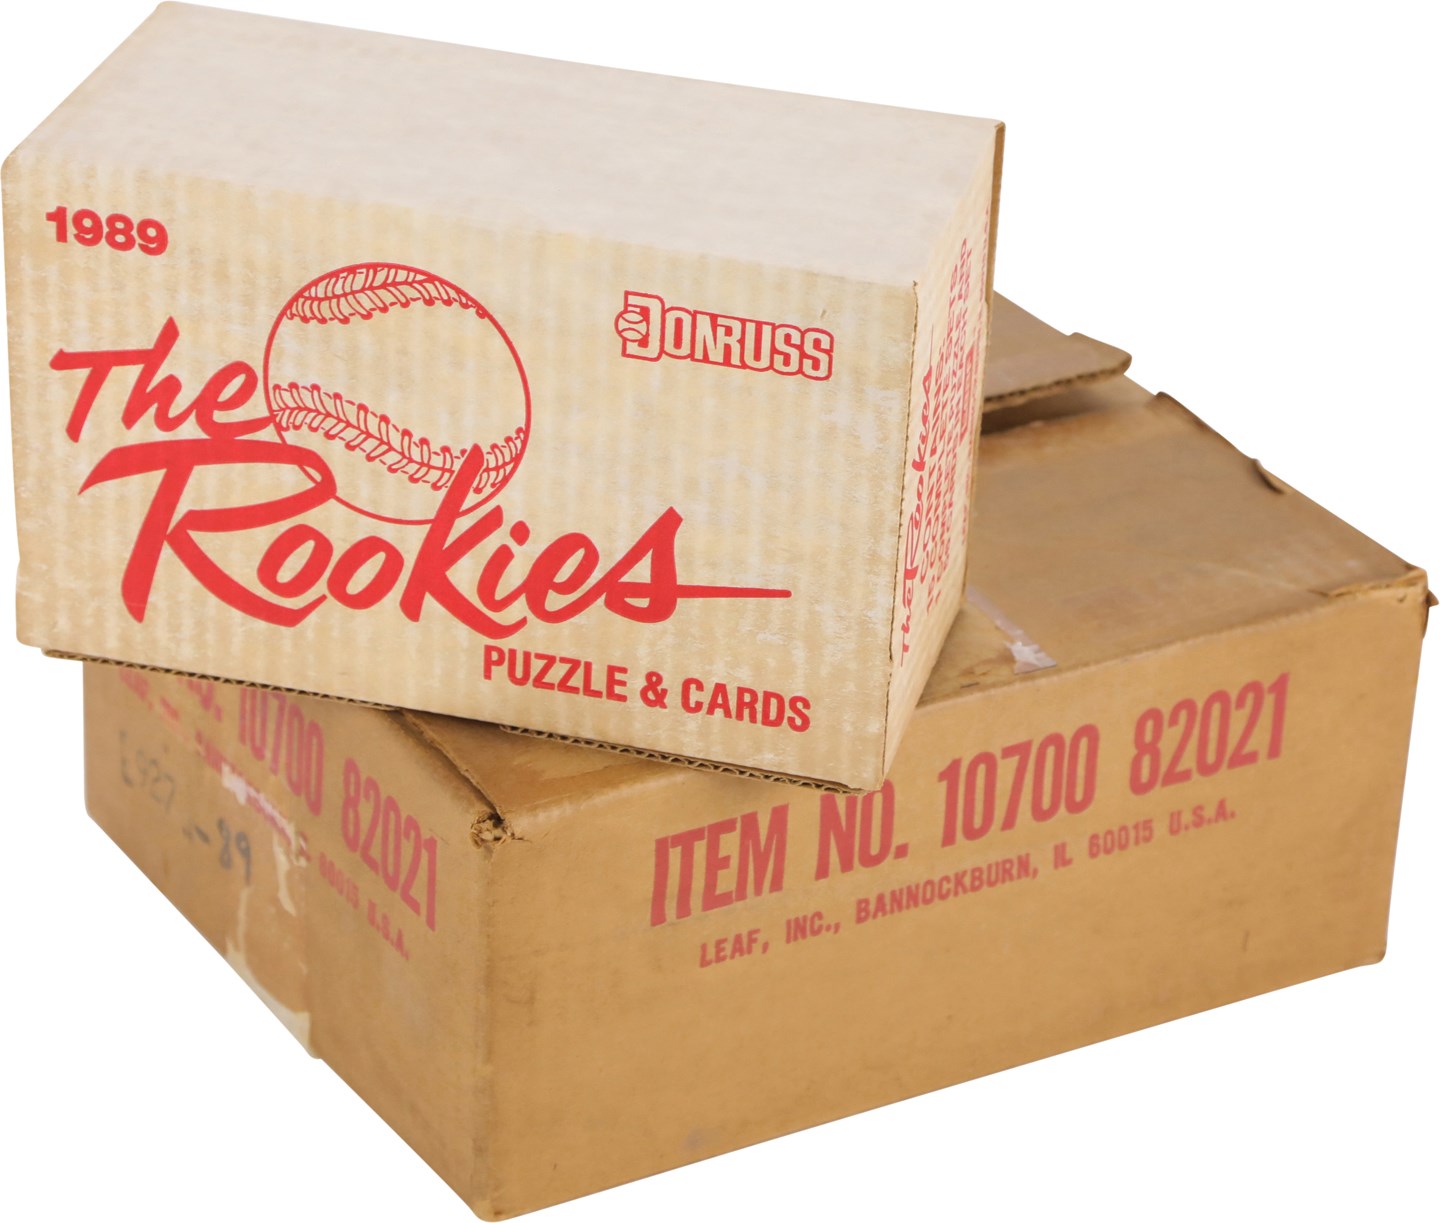 Unopened Boxes, Packs And Cases - 1989 Donruss The Rookies Factory Case w/30 Sealed Sets - Ken Griffey Jr. Rookie Card